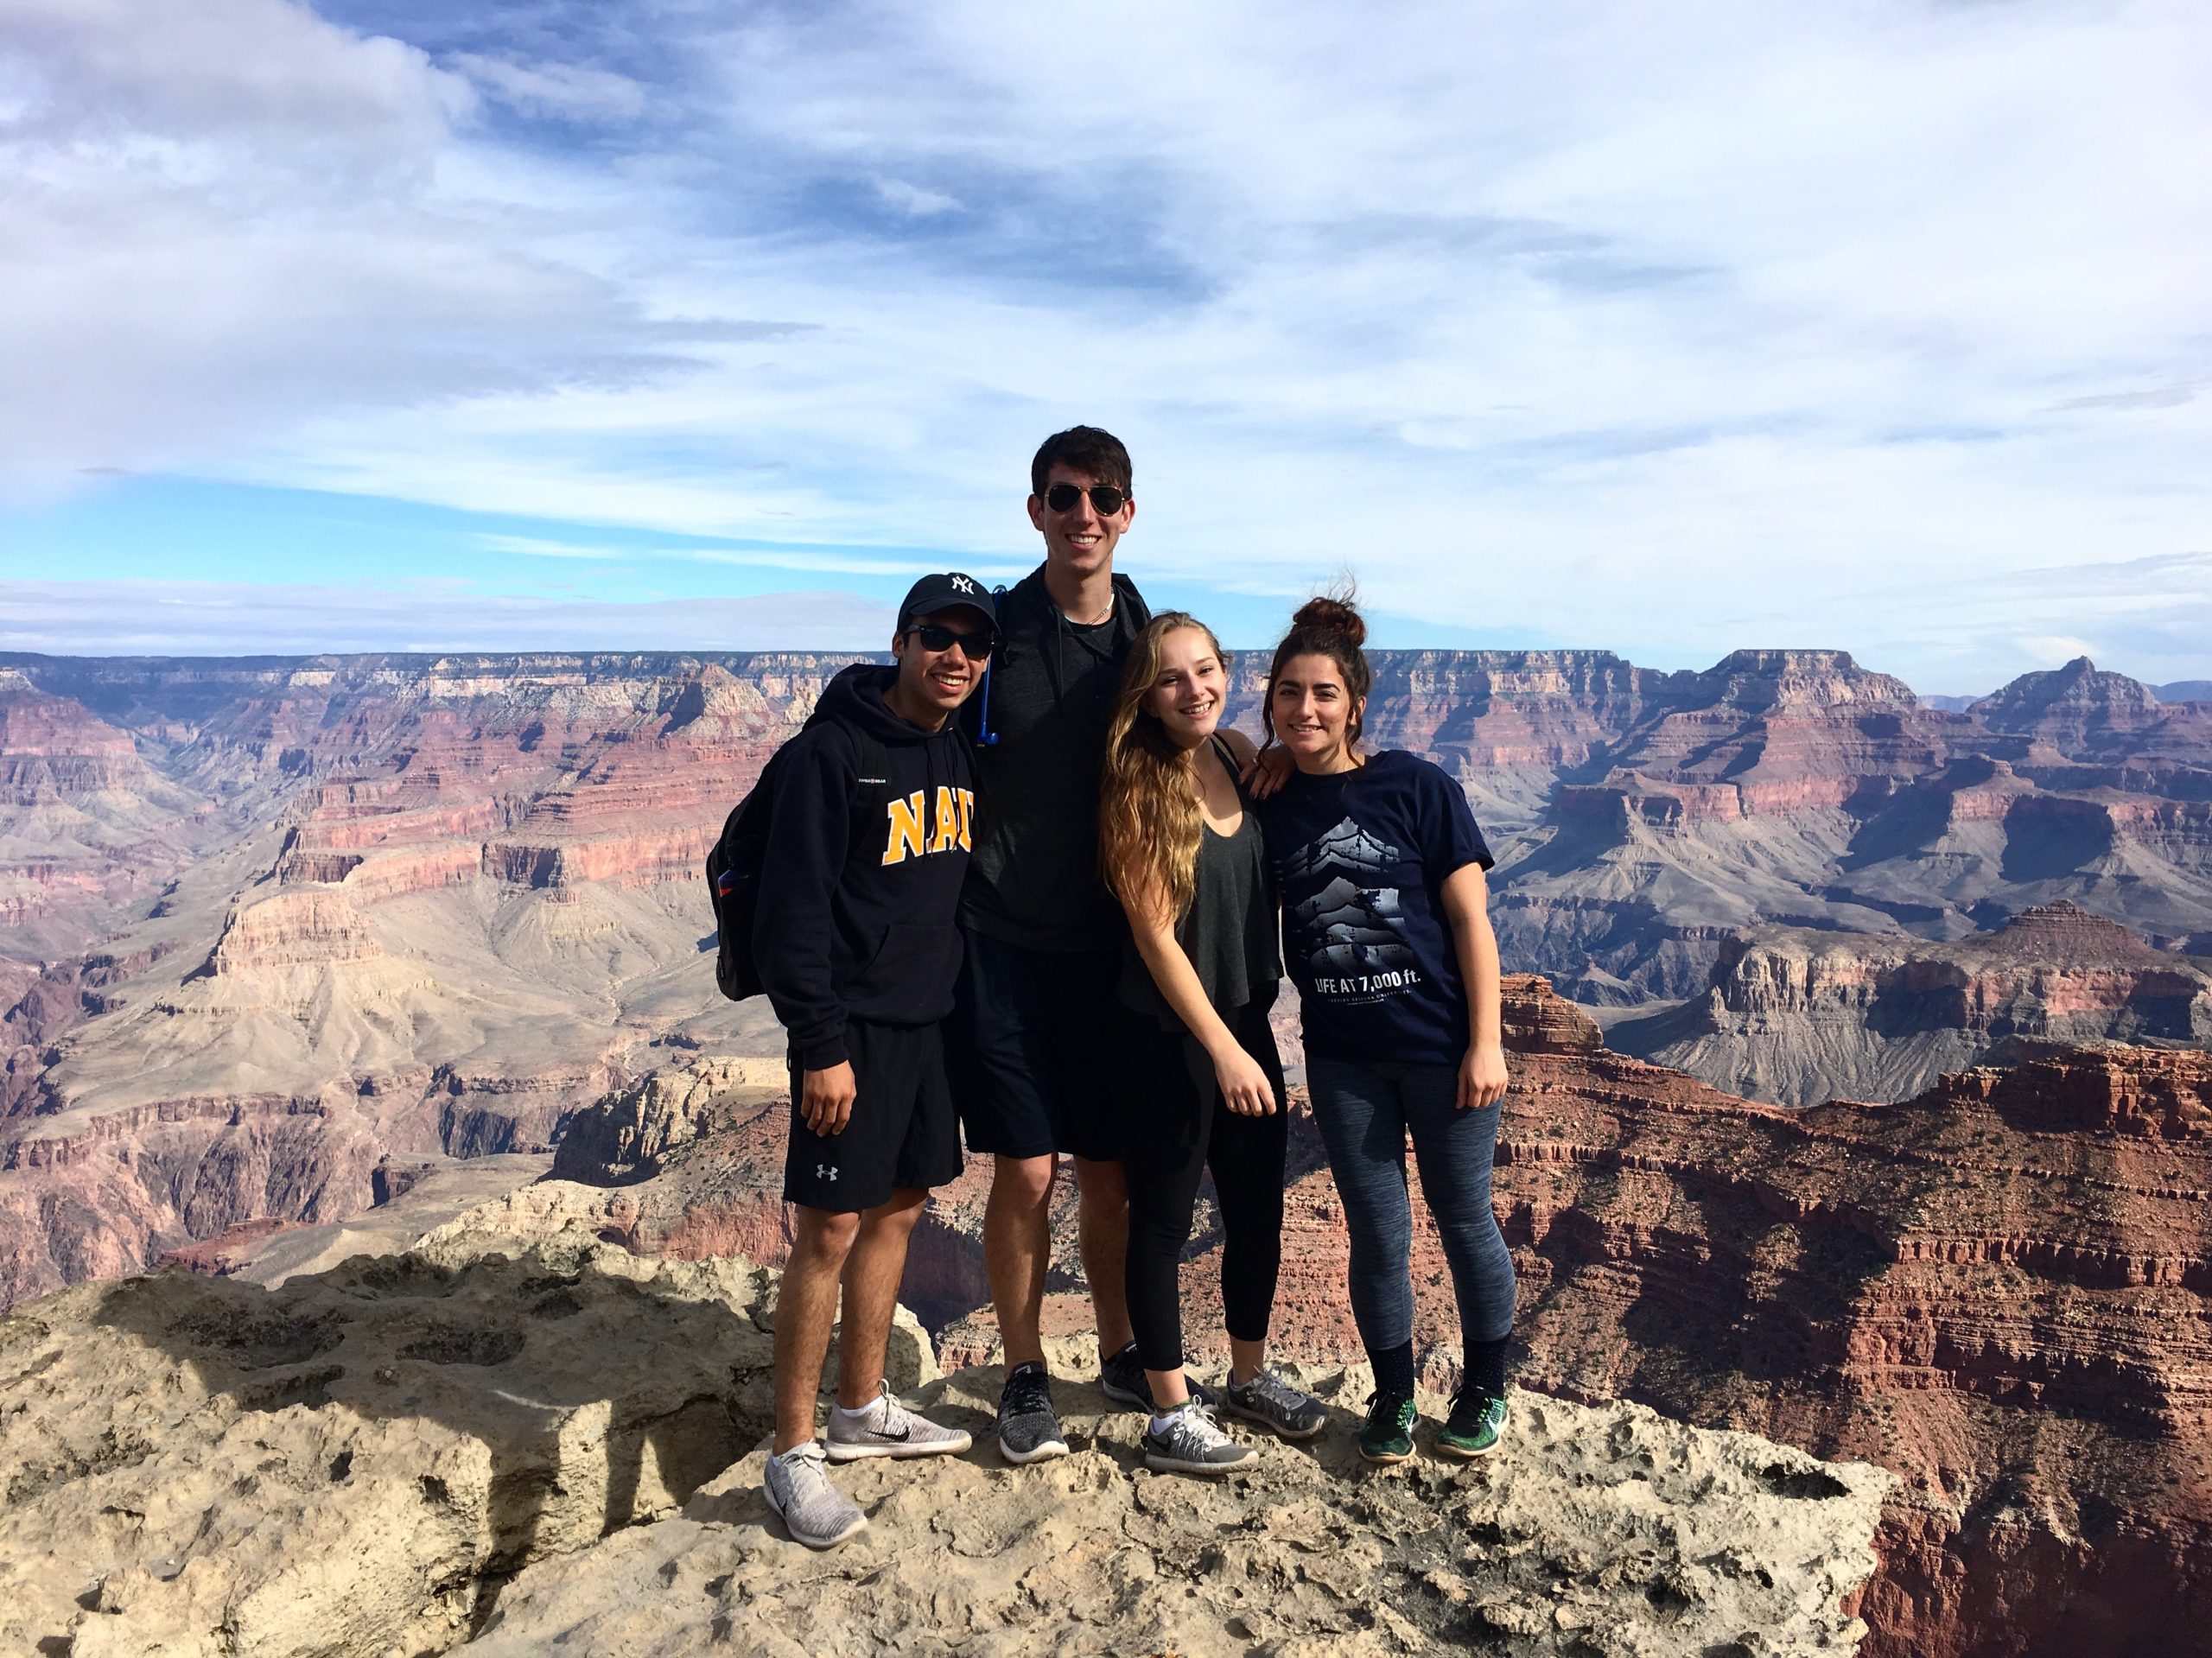 Alyssa and friends at the Grand Canyon